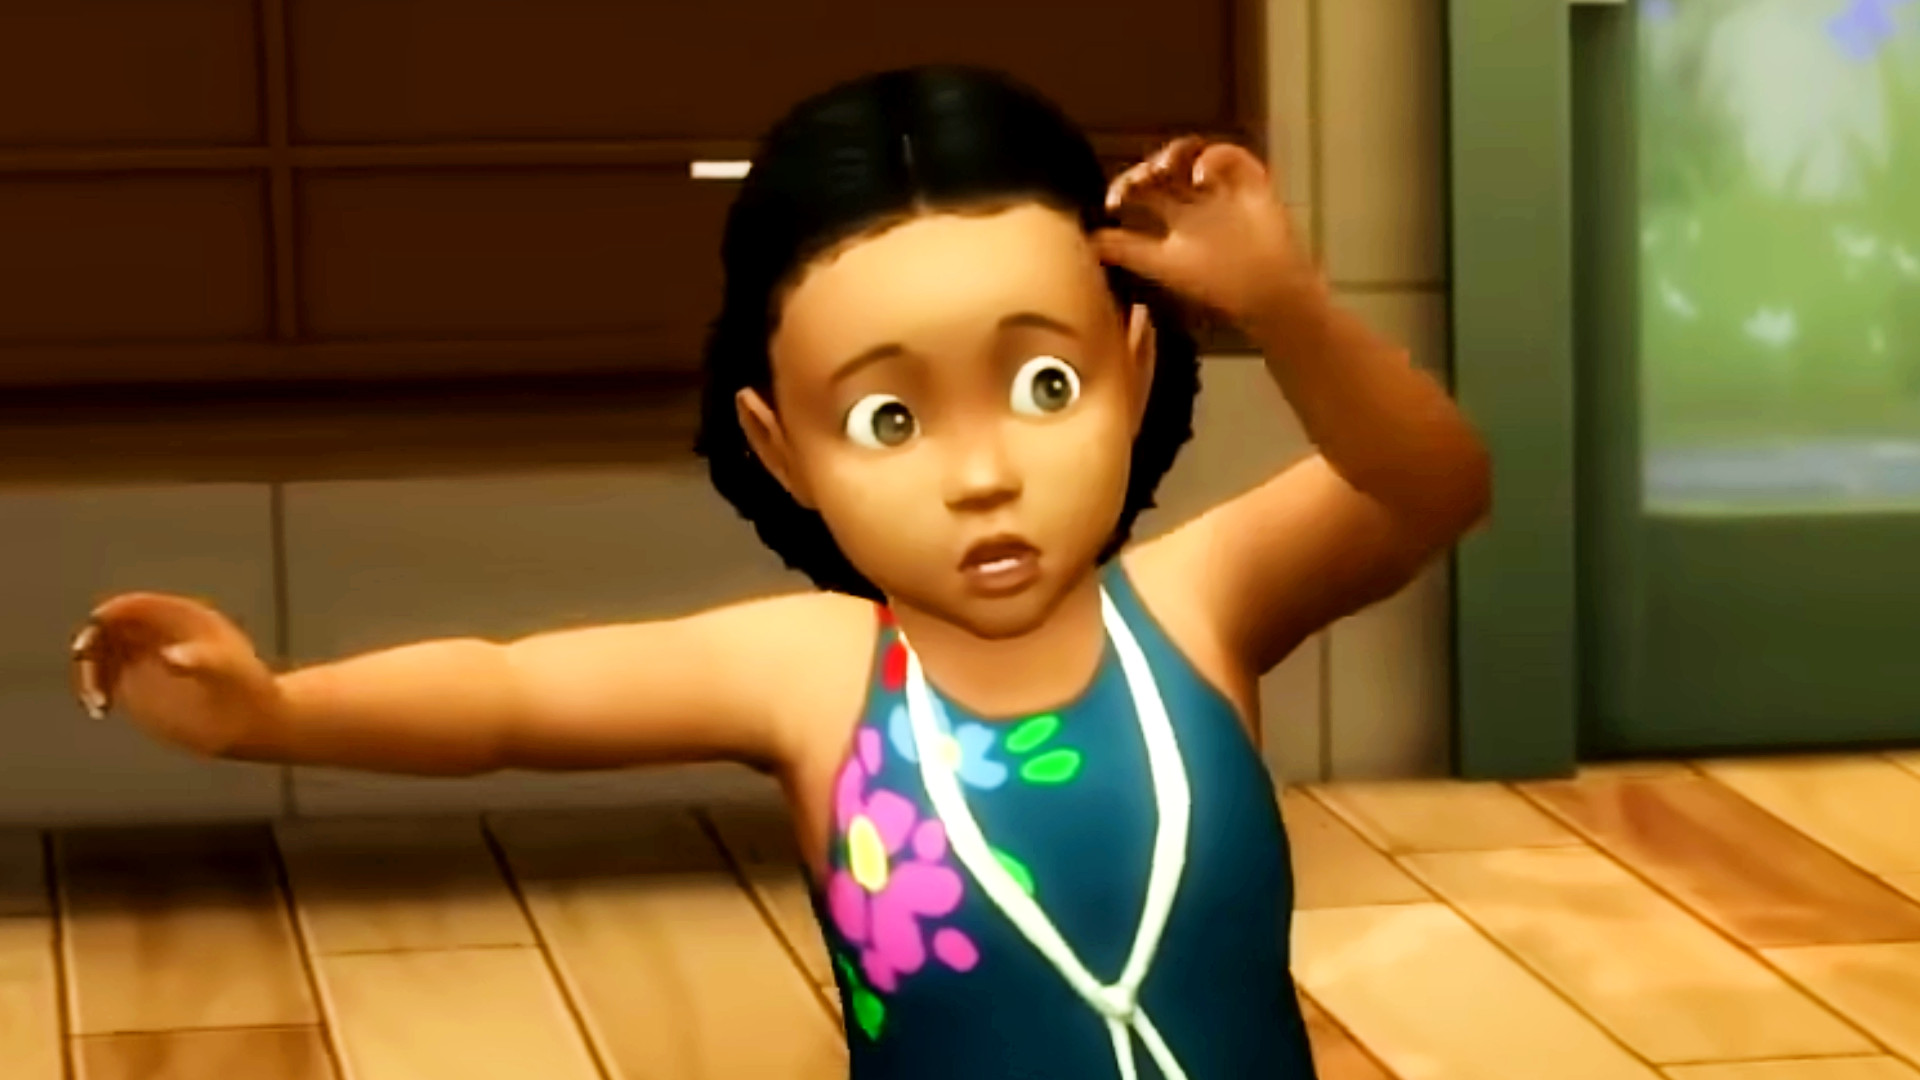 The Sims 4 toddlers, wants, and fears top EA’s ‘laundry list’ for 2023